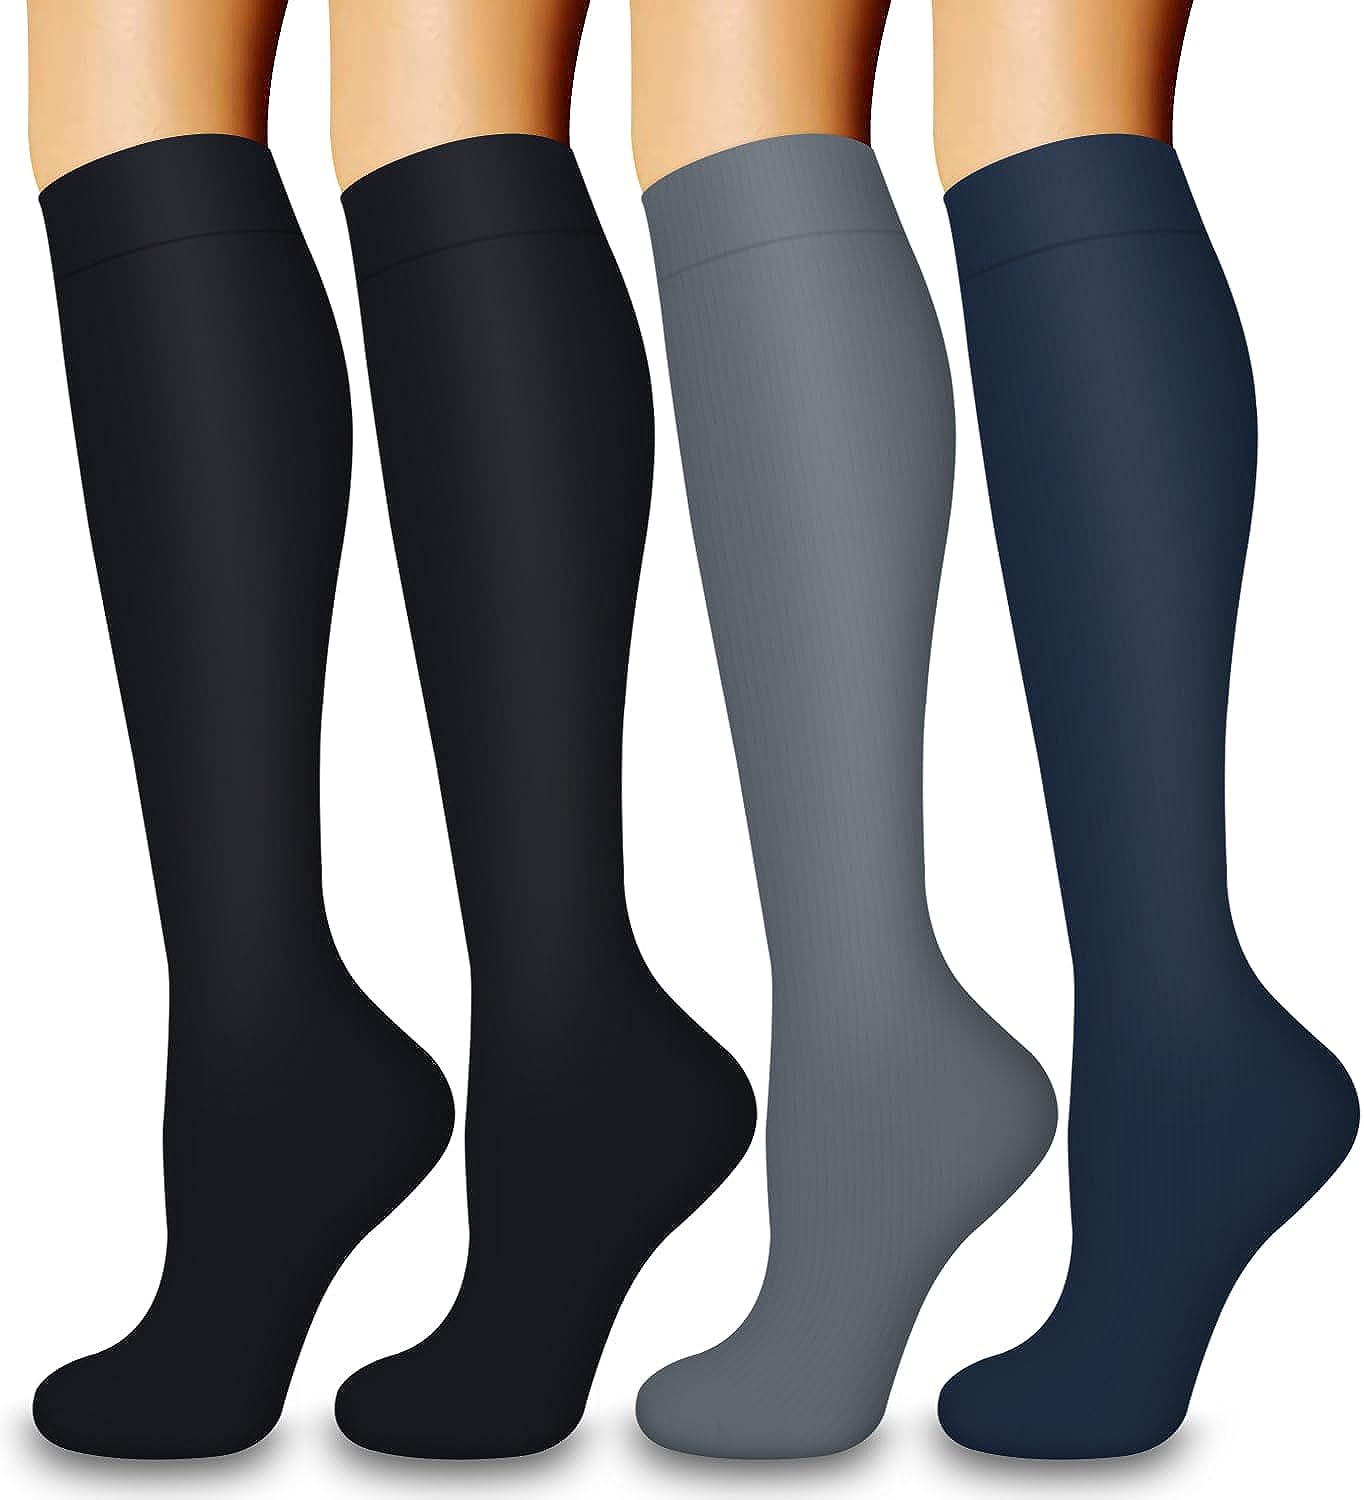 Up To 49% Off on Laite Hebe Compression Socks